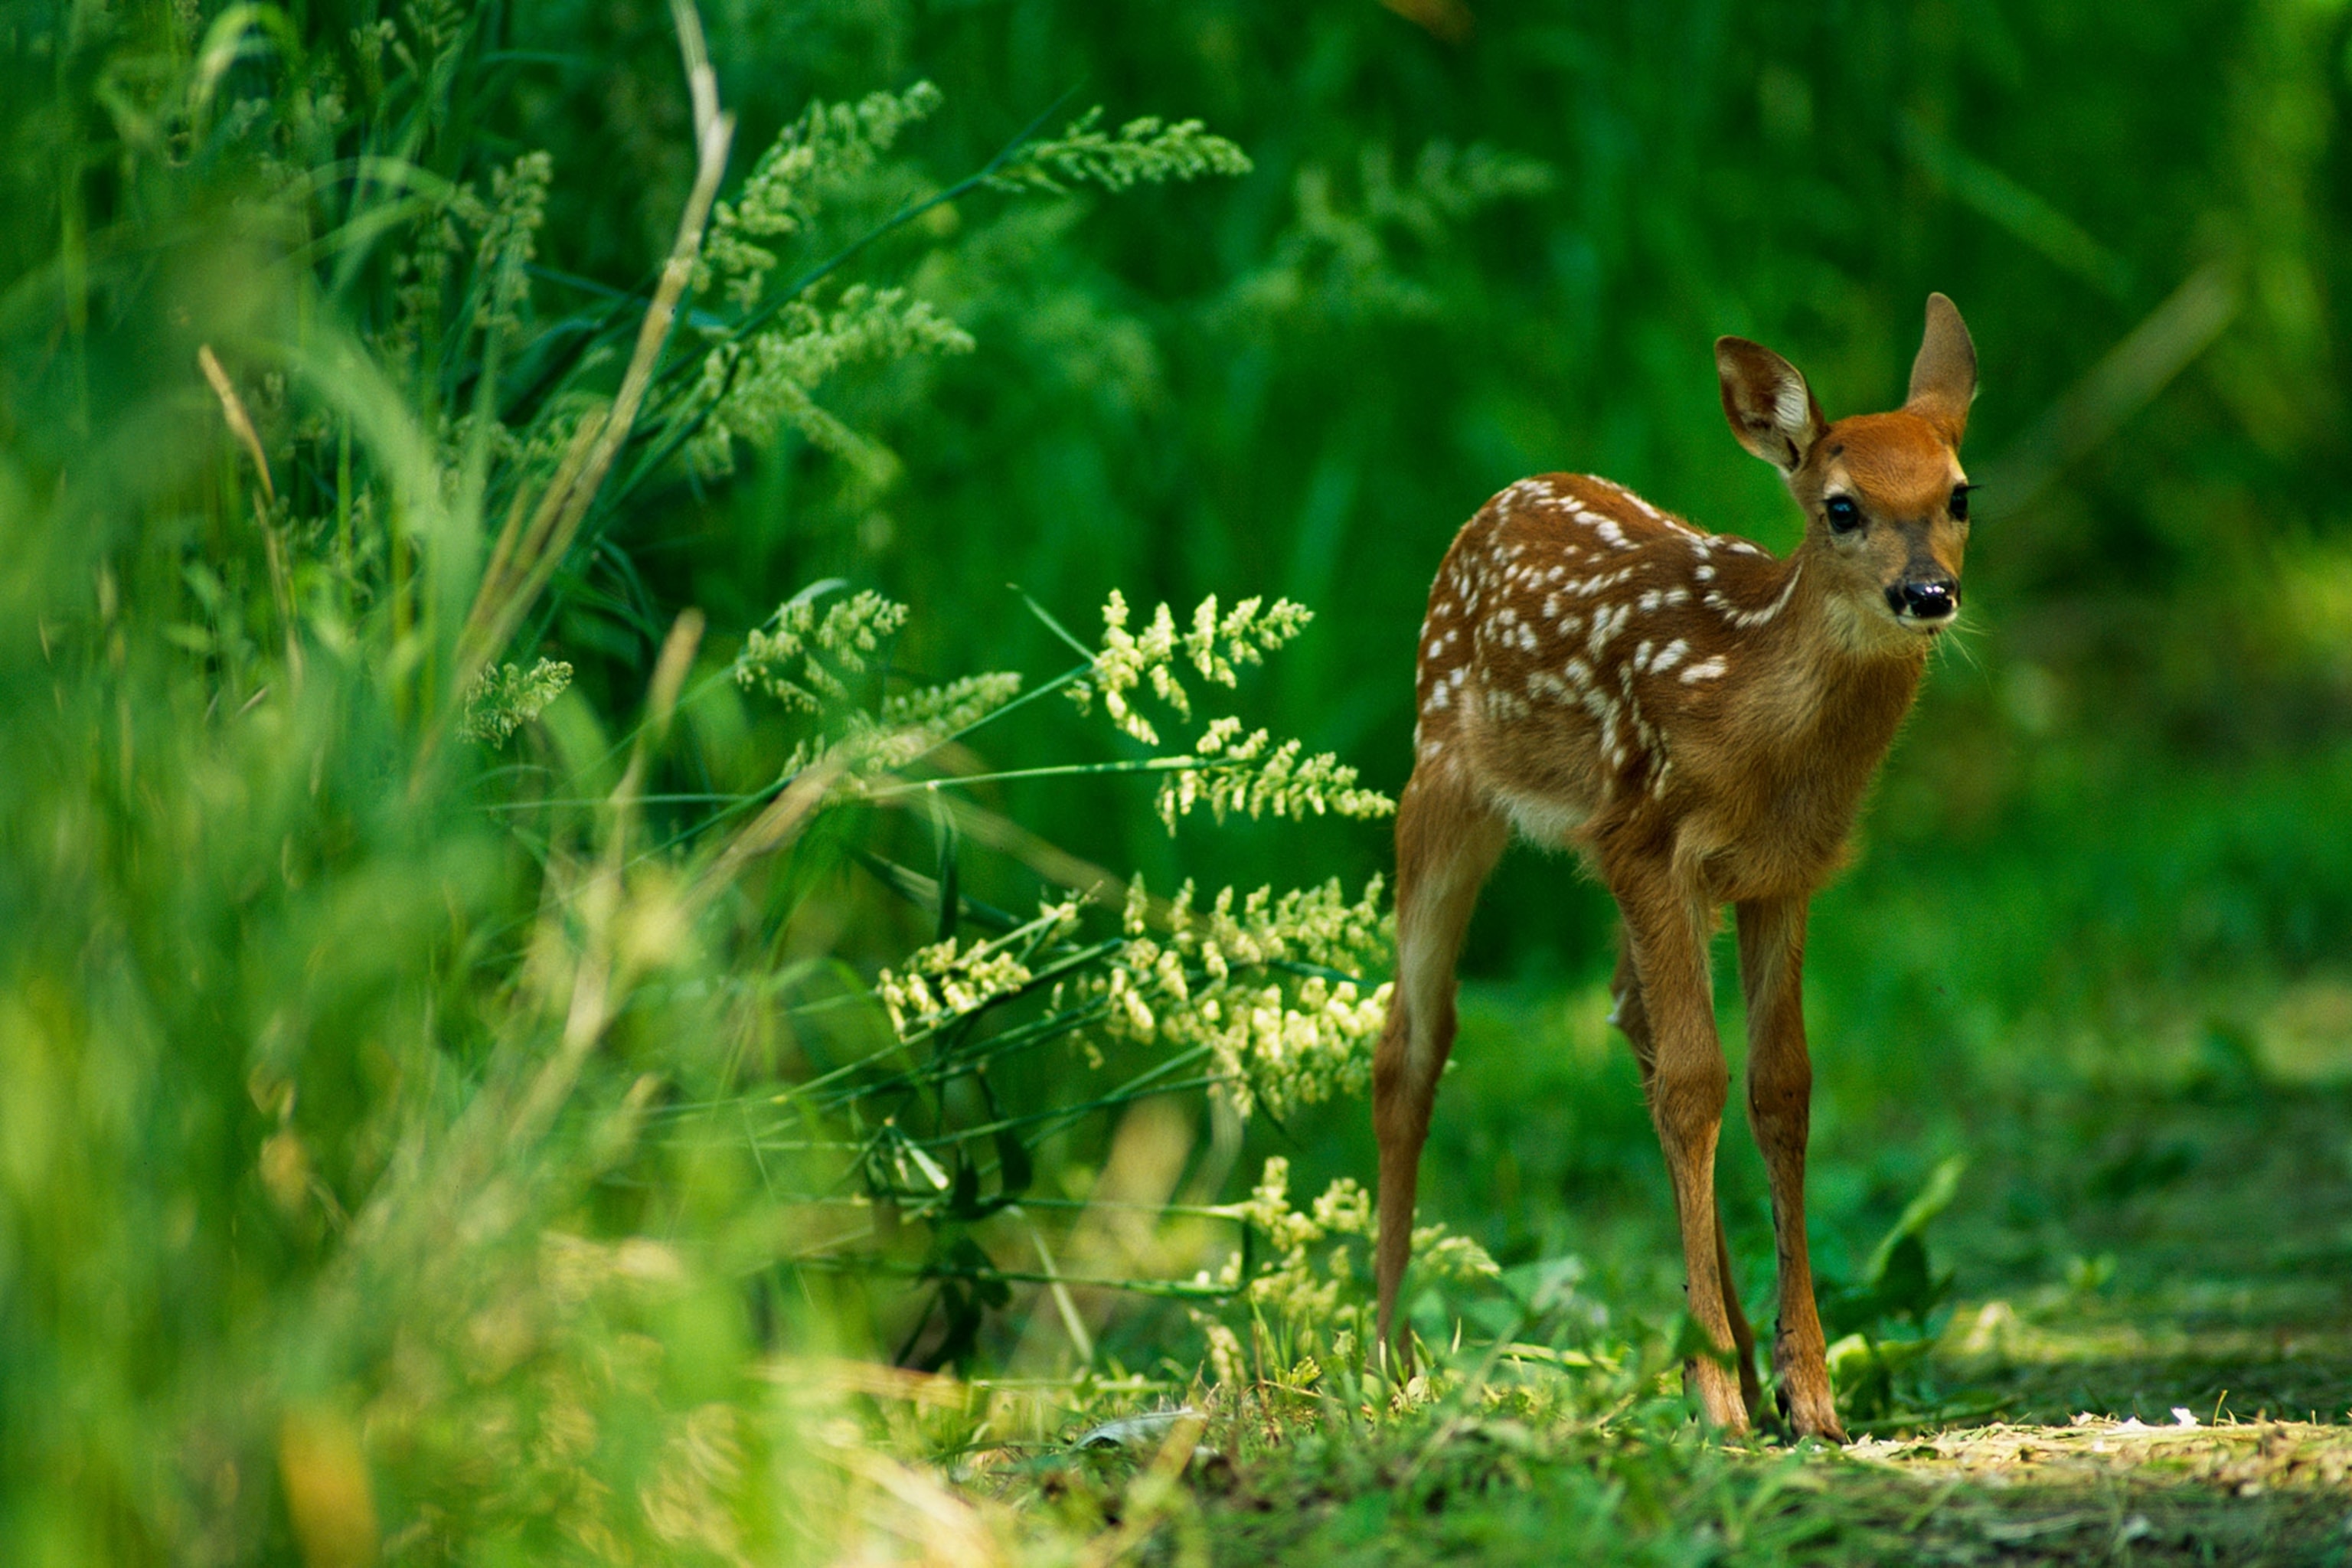 What do you call a baby deer?